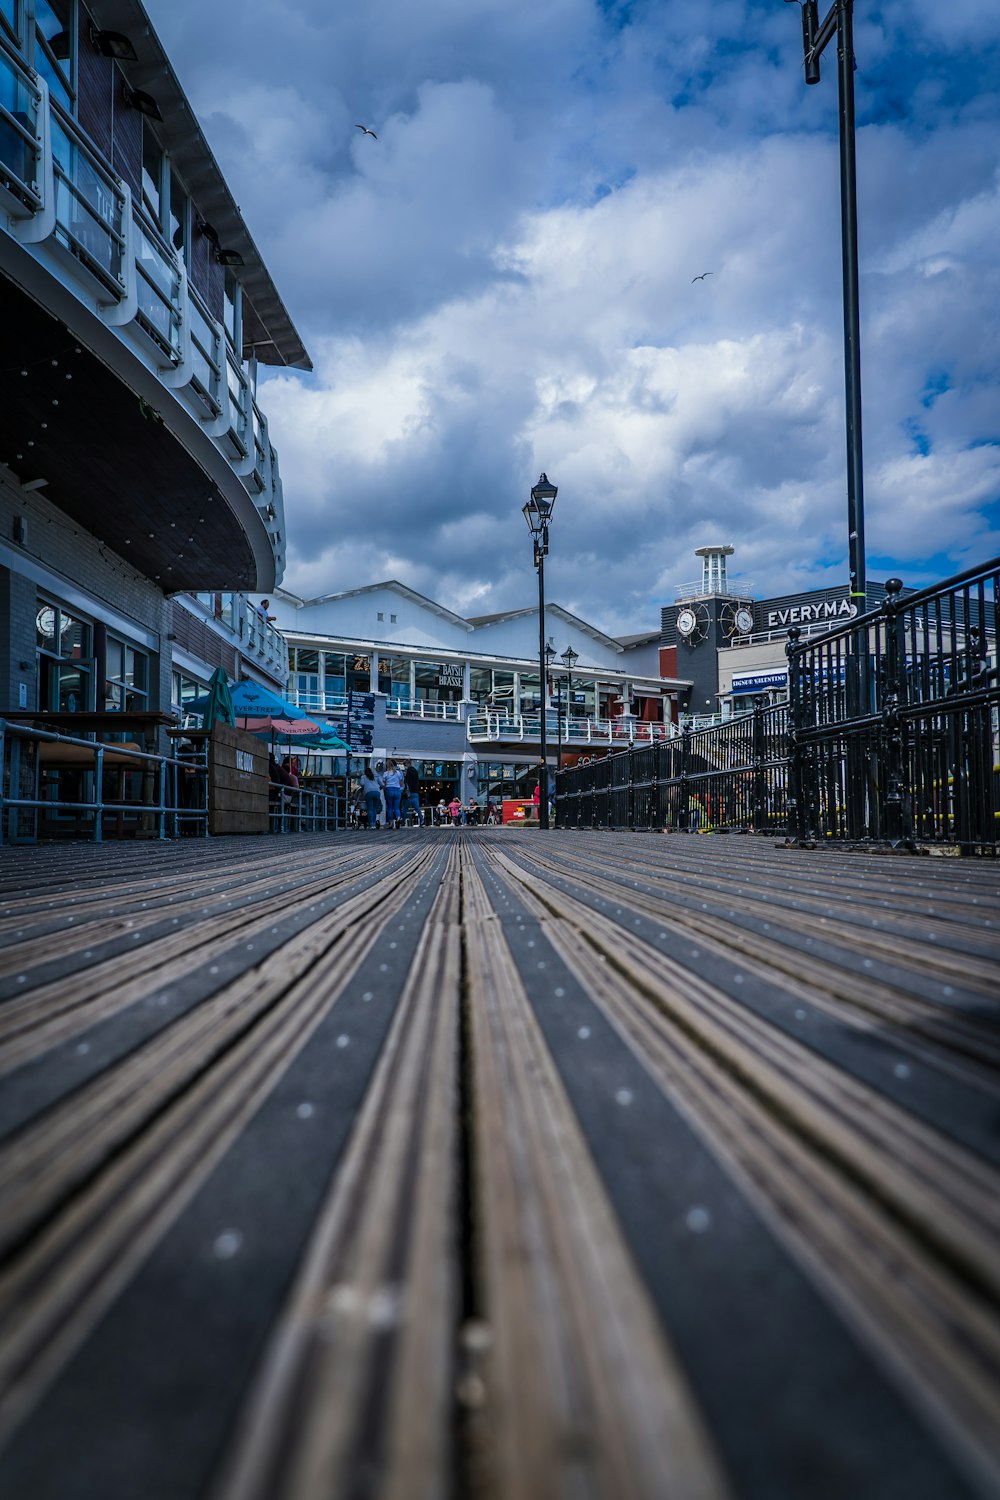 a wooden boardwalk in front of a building under a cloudy sky